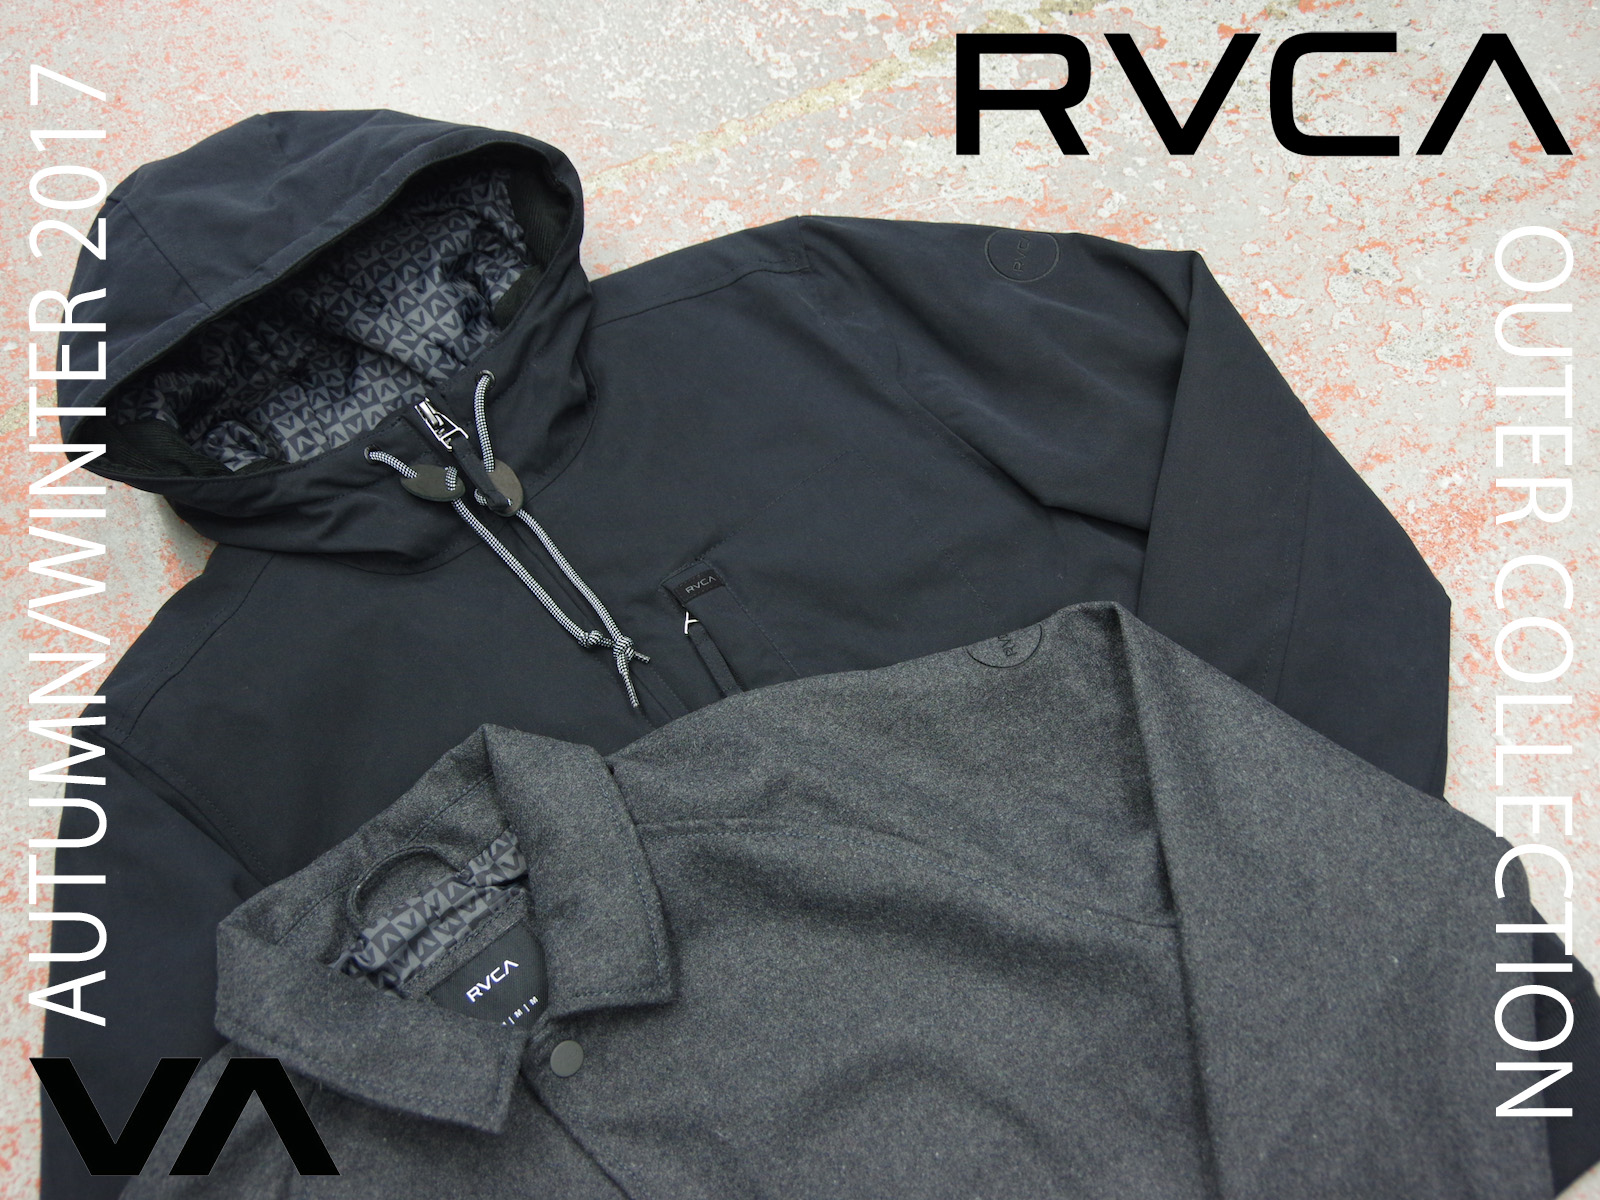 NEW ARRIVALS – RVCA AUTUMN/WINTER 2017 OUTER COLLECTION